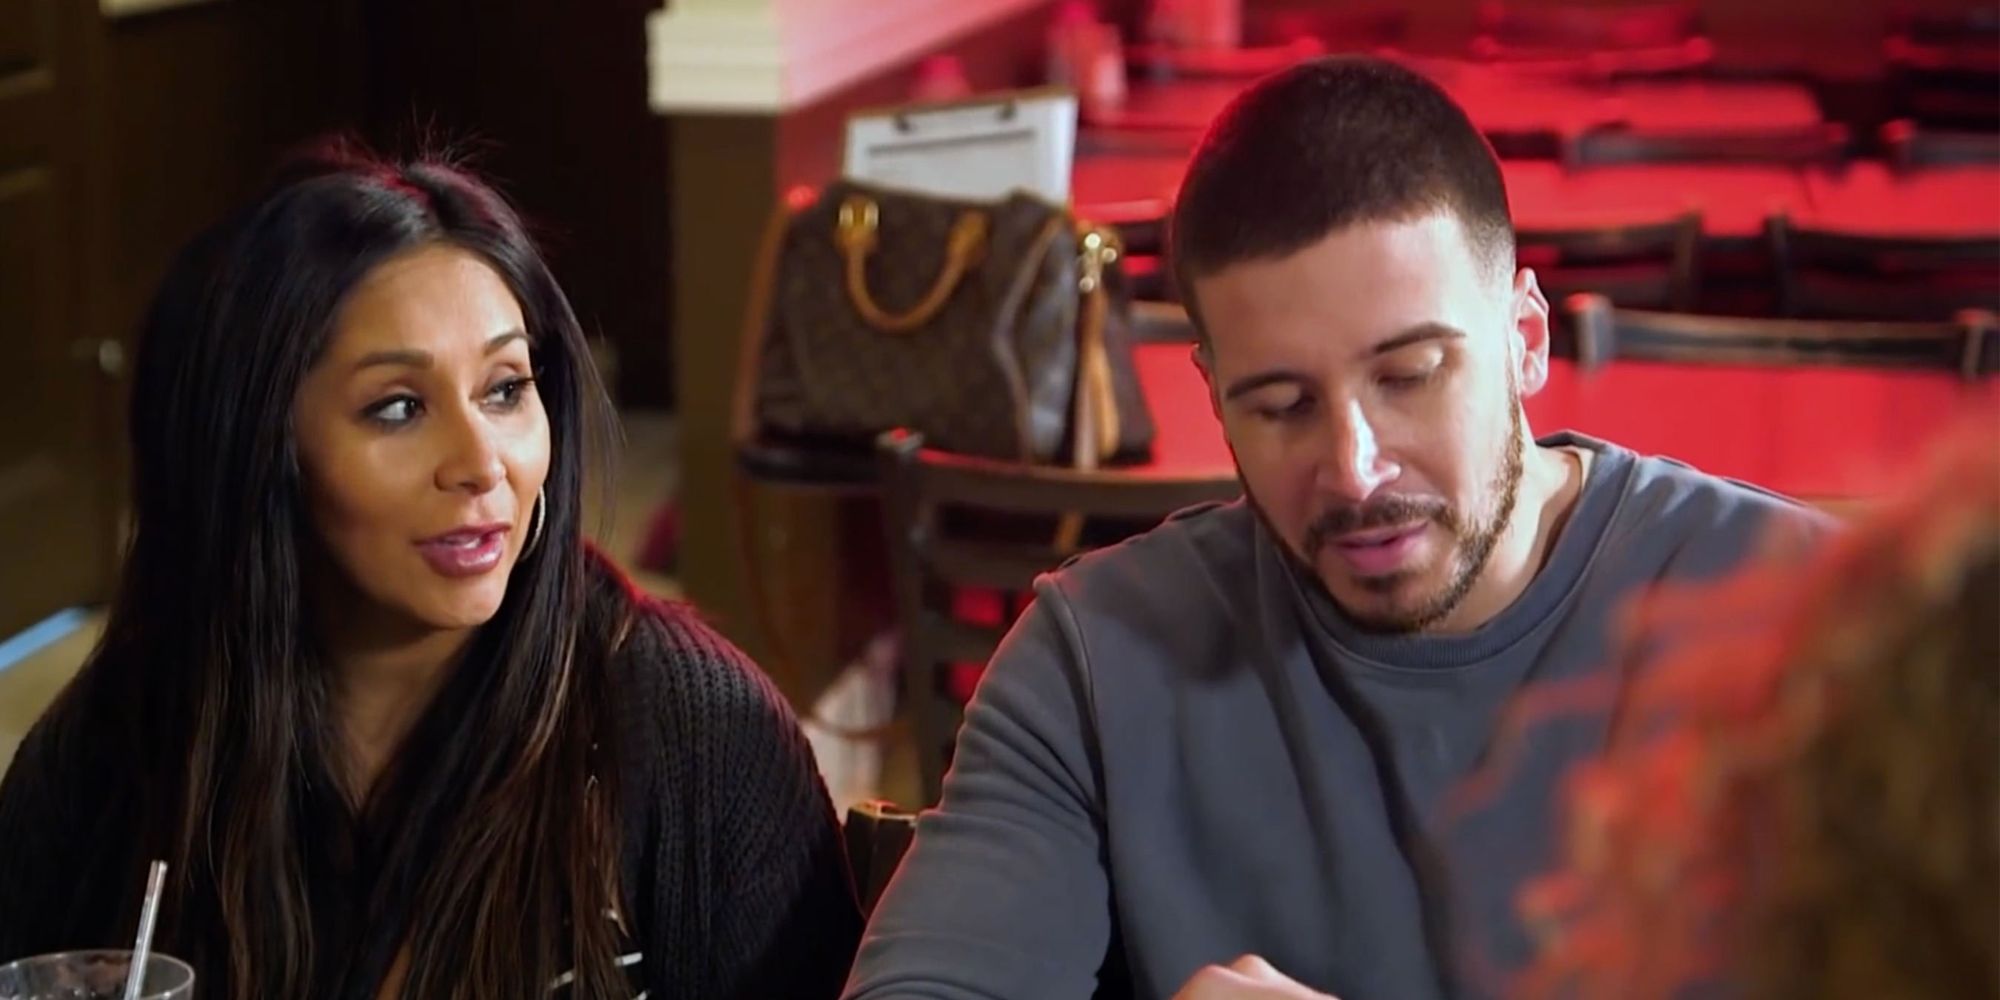 Jersey Shore’s Vinny Guadagnino Has Dated Some Beauties! Check Out His Relationship History